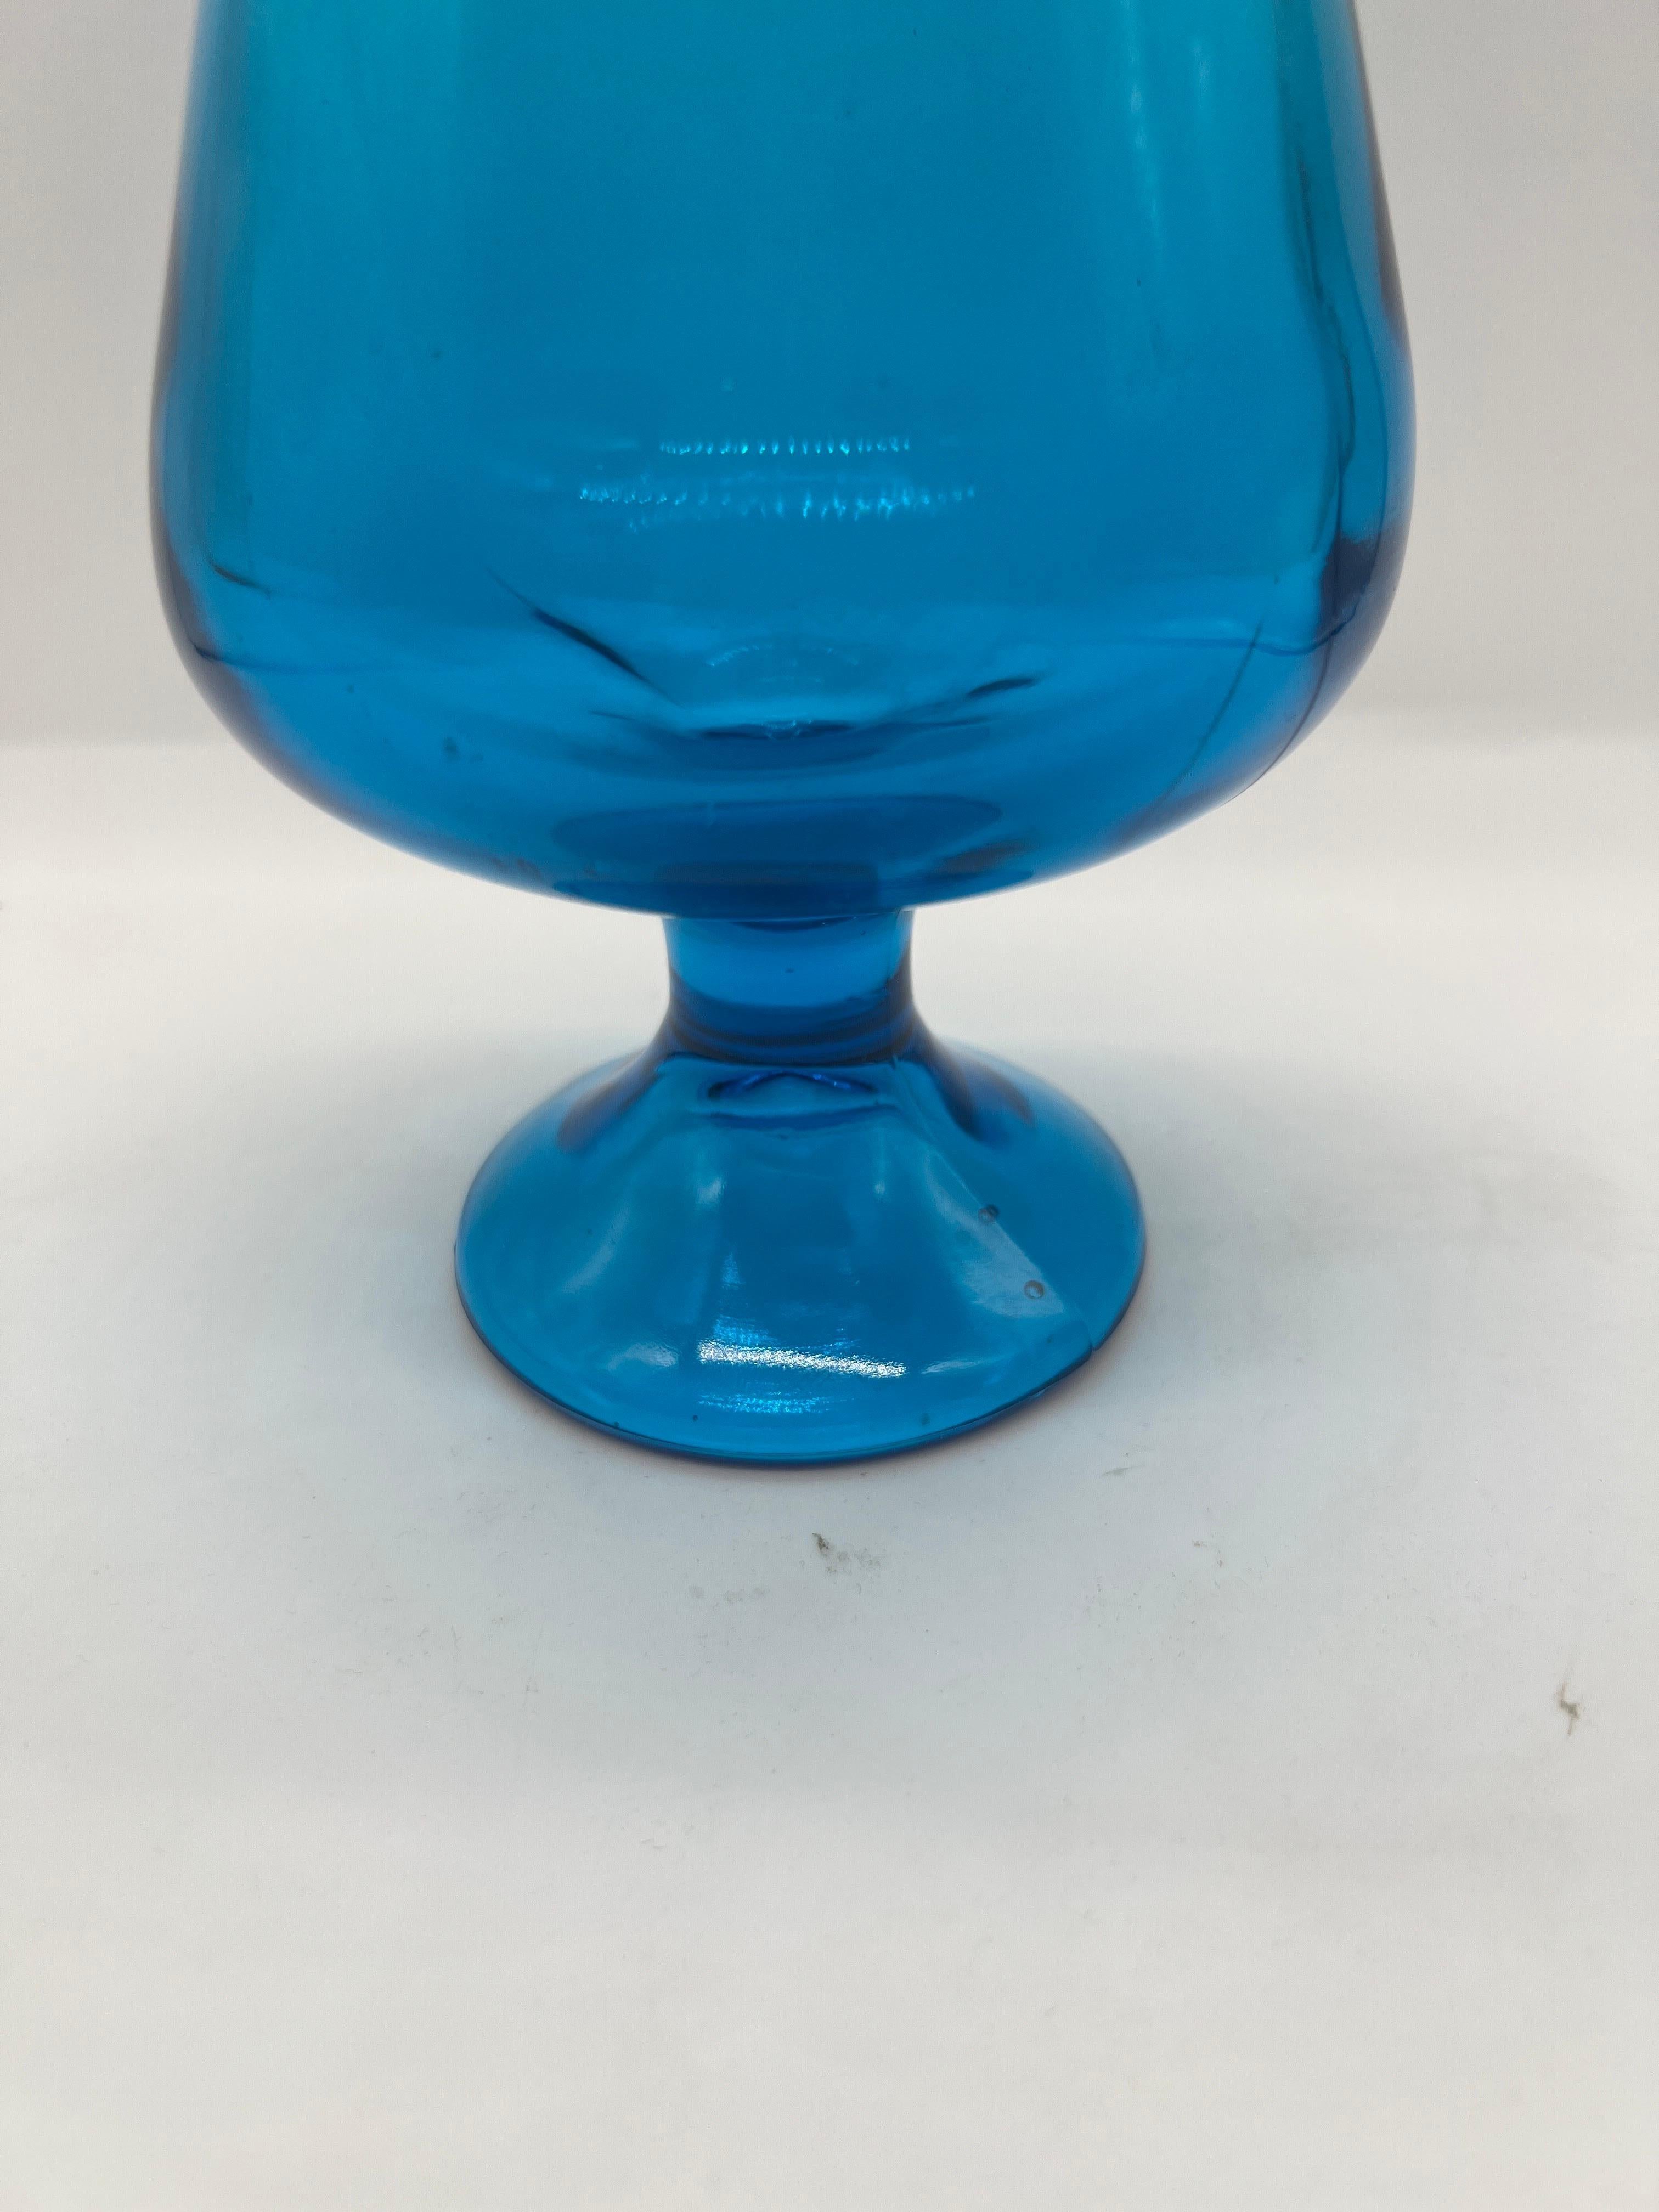 L.E. Smith (American, founded 1907), circa mid century.

A large blue glass 